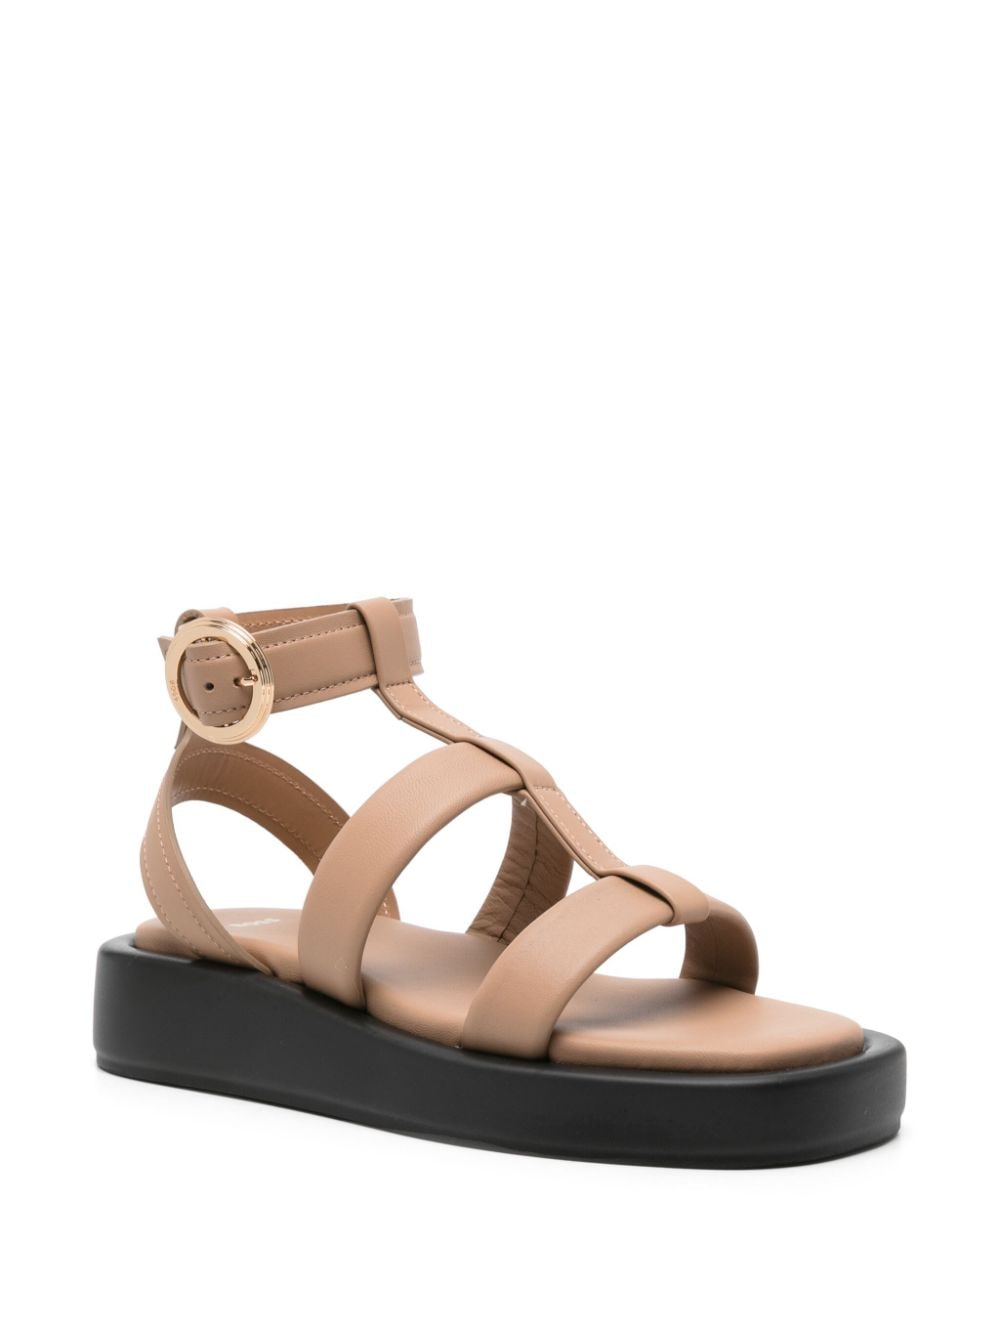 BOSS caged leather sandals - Beige